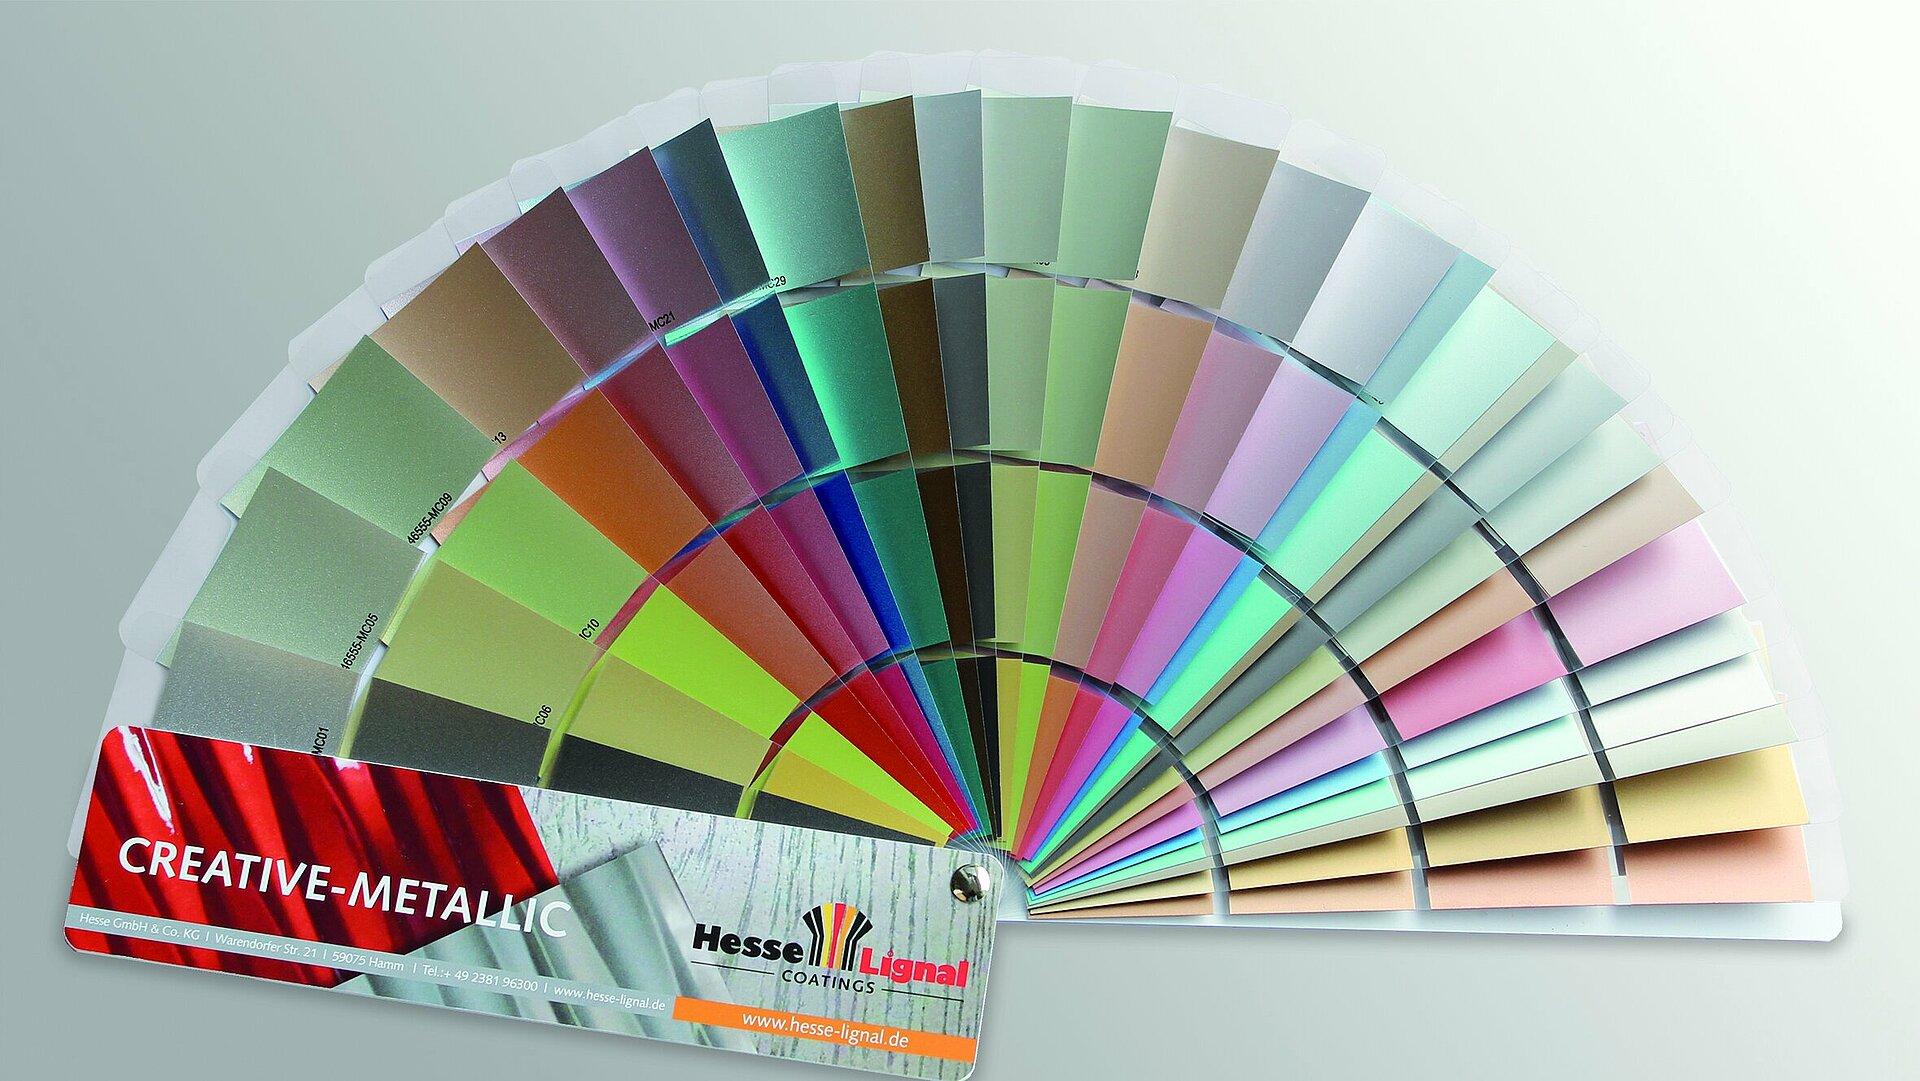 The Creative Metallic colour chart from Hesse Lignal